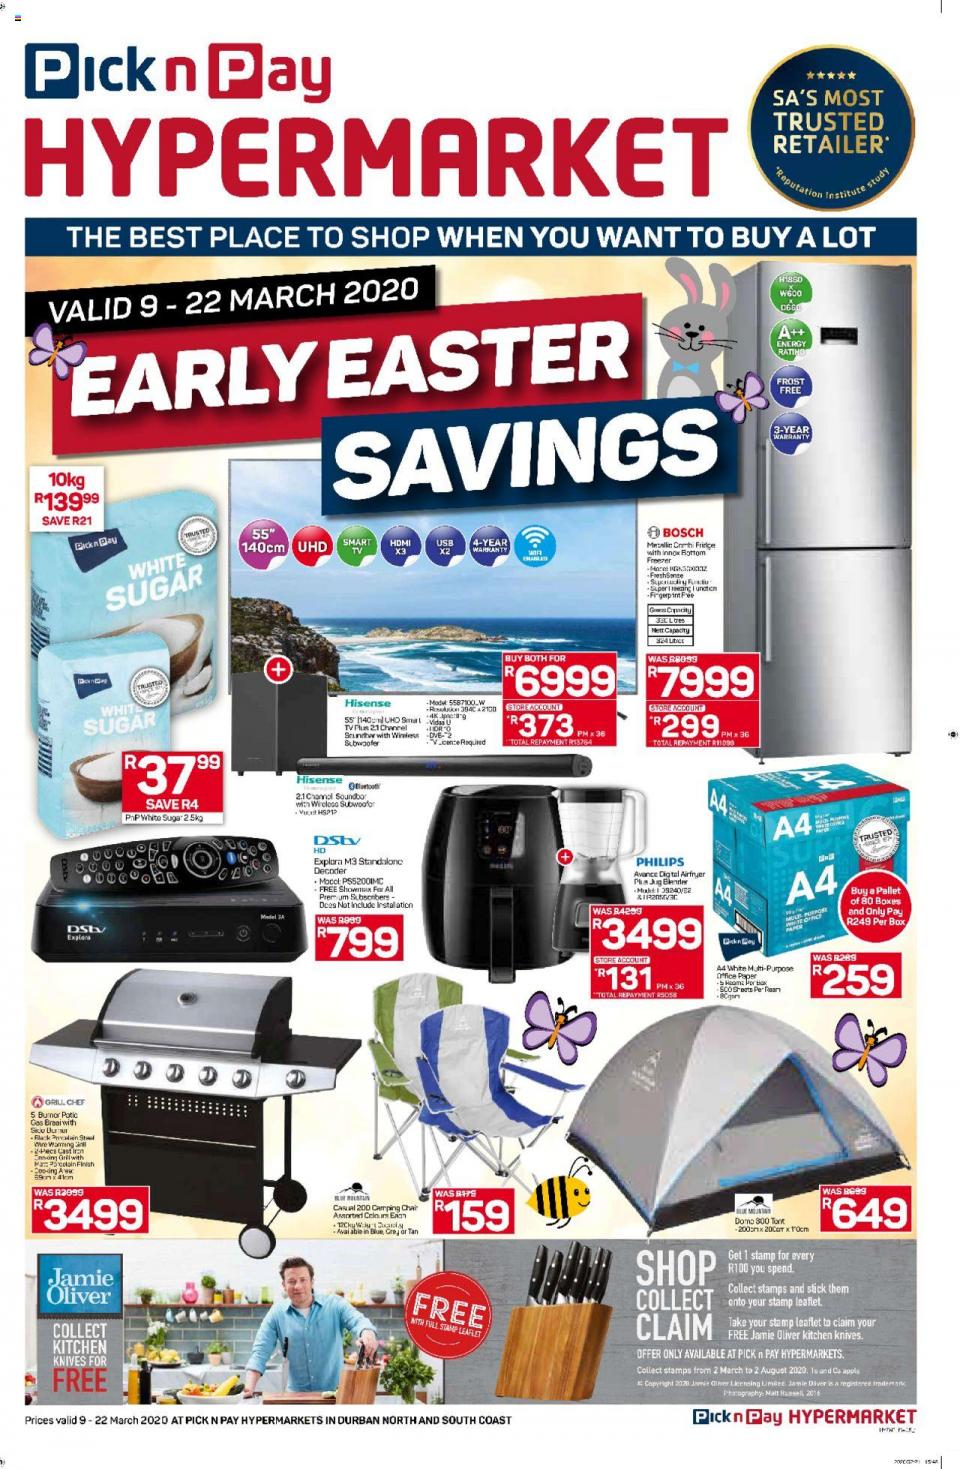 Pick n Pay Specials Early Easter Savings Hypermarkets 10 March 2020